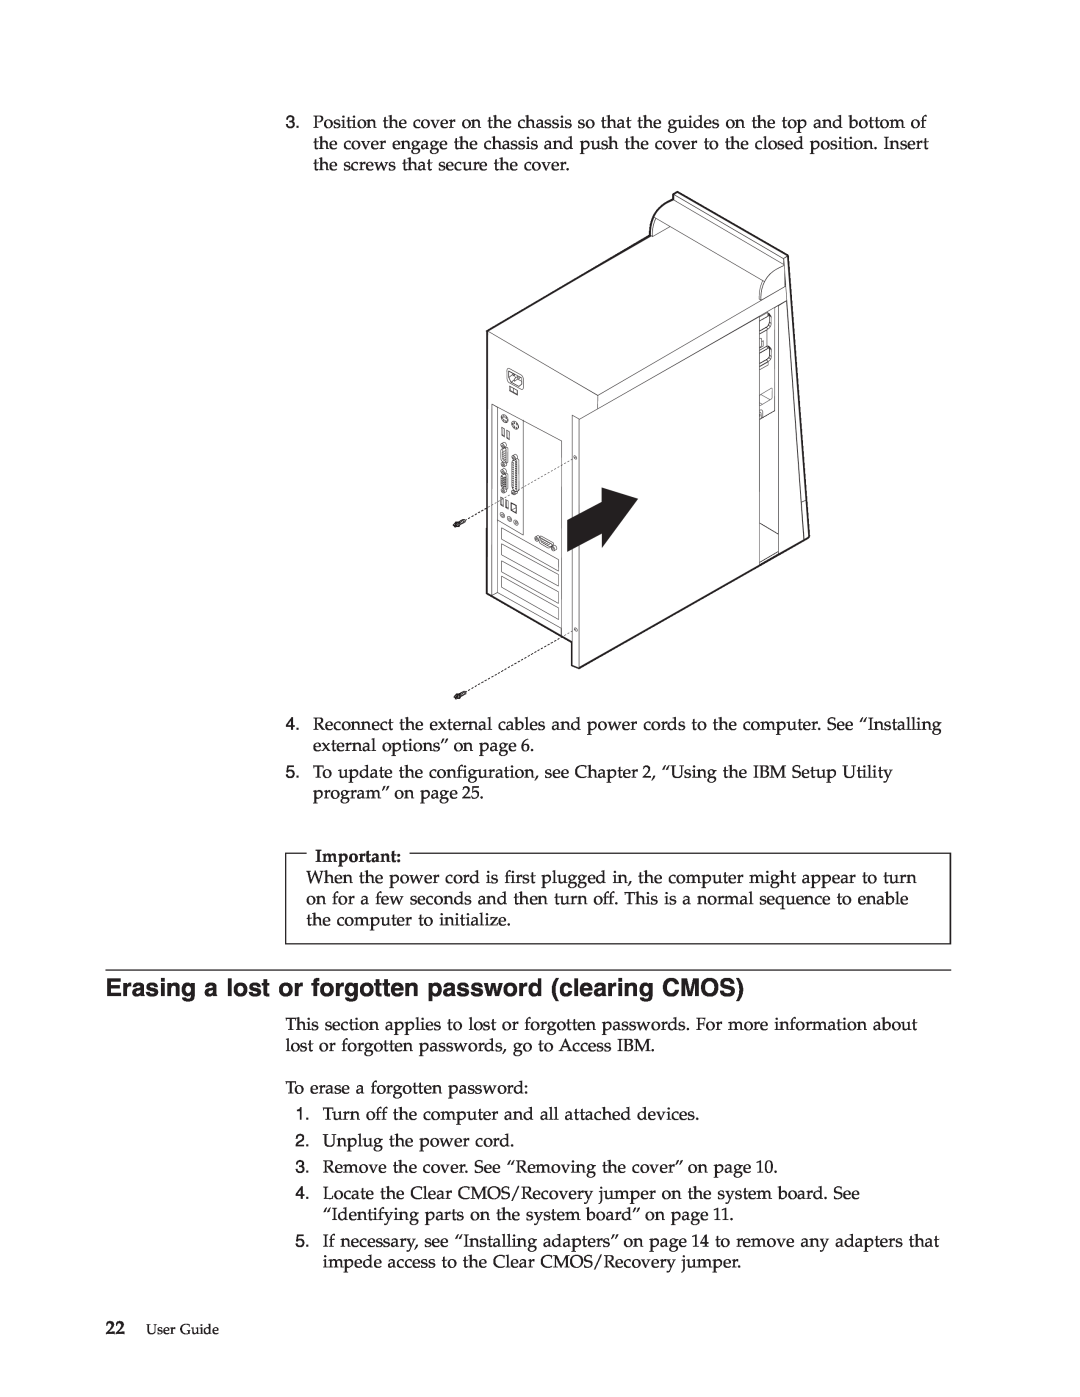 IBM 6824, 2289 manual Erasing a lost or forgotten password clearing CMOS, User Guide 